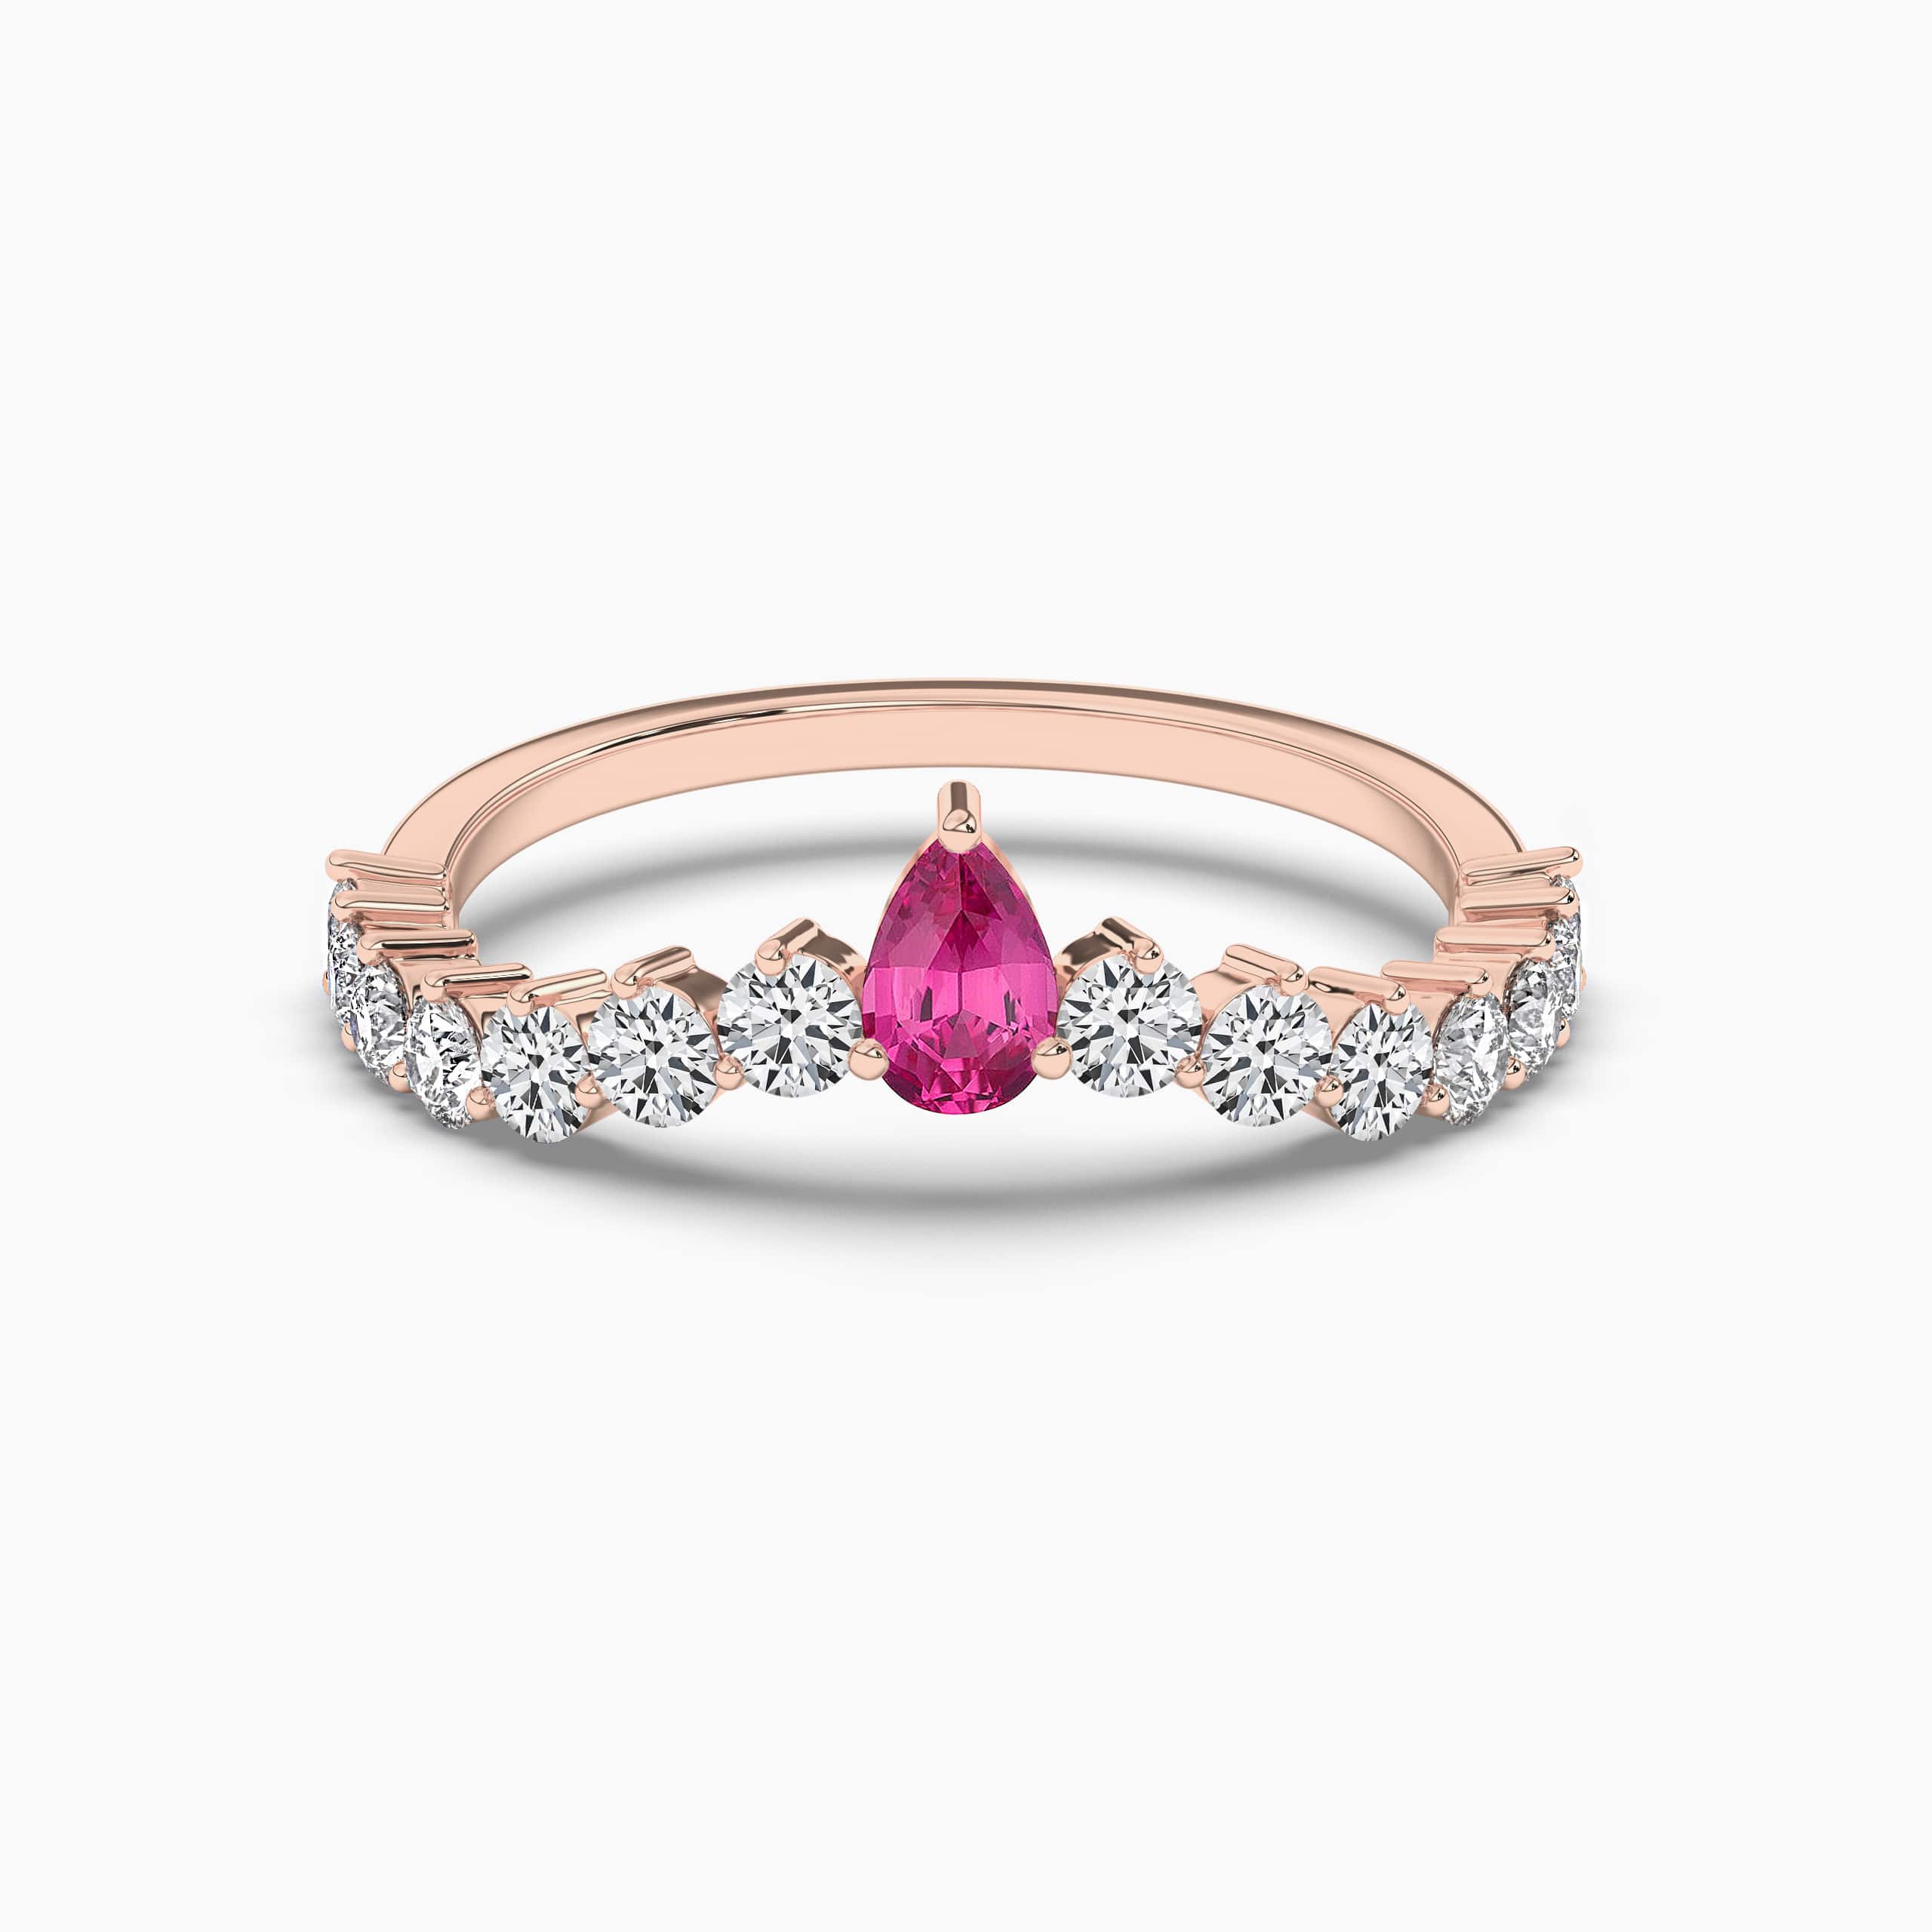 PEAR CUT PINK SAPPHIRE & DIAMOND ENGAGEMENT RING ROSE GOLD